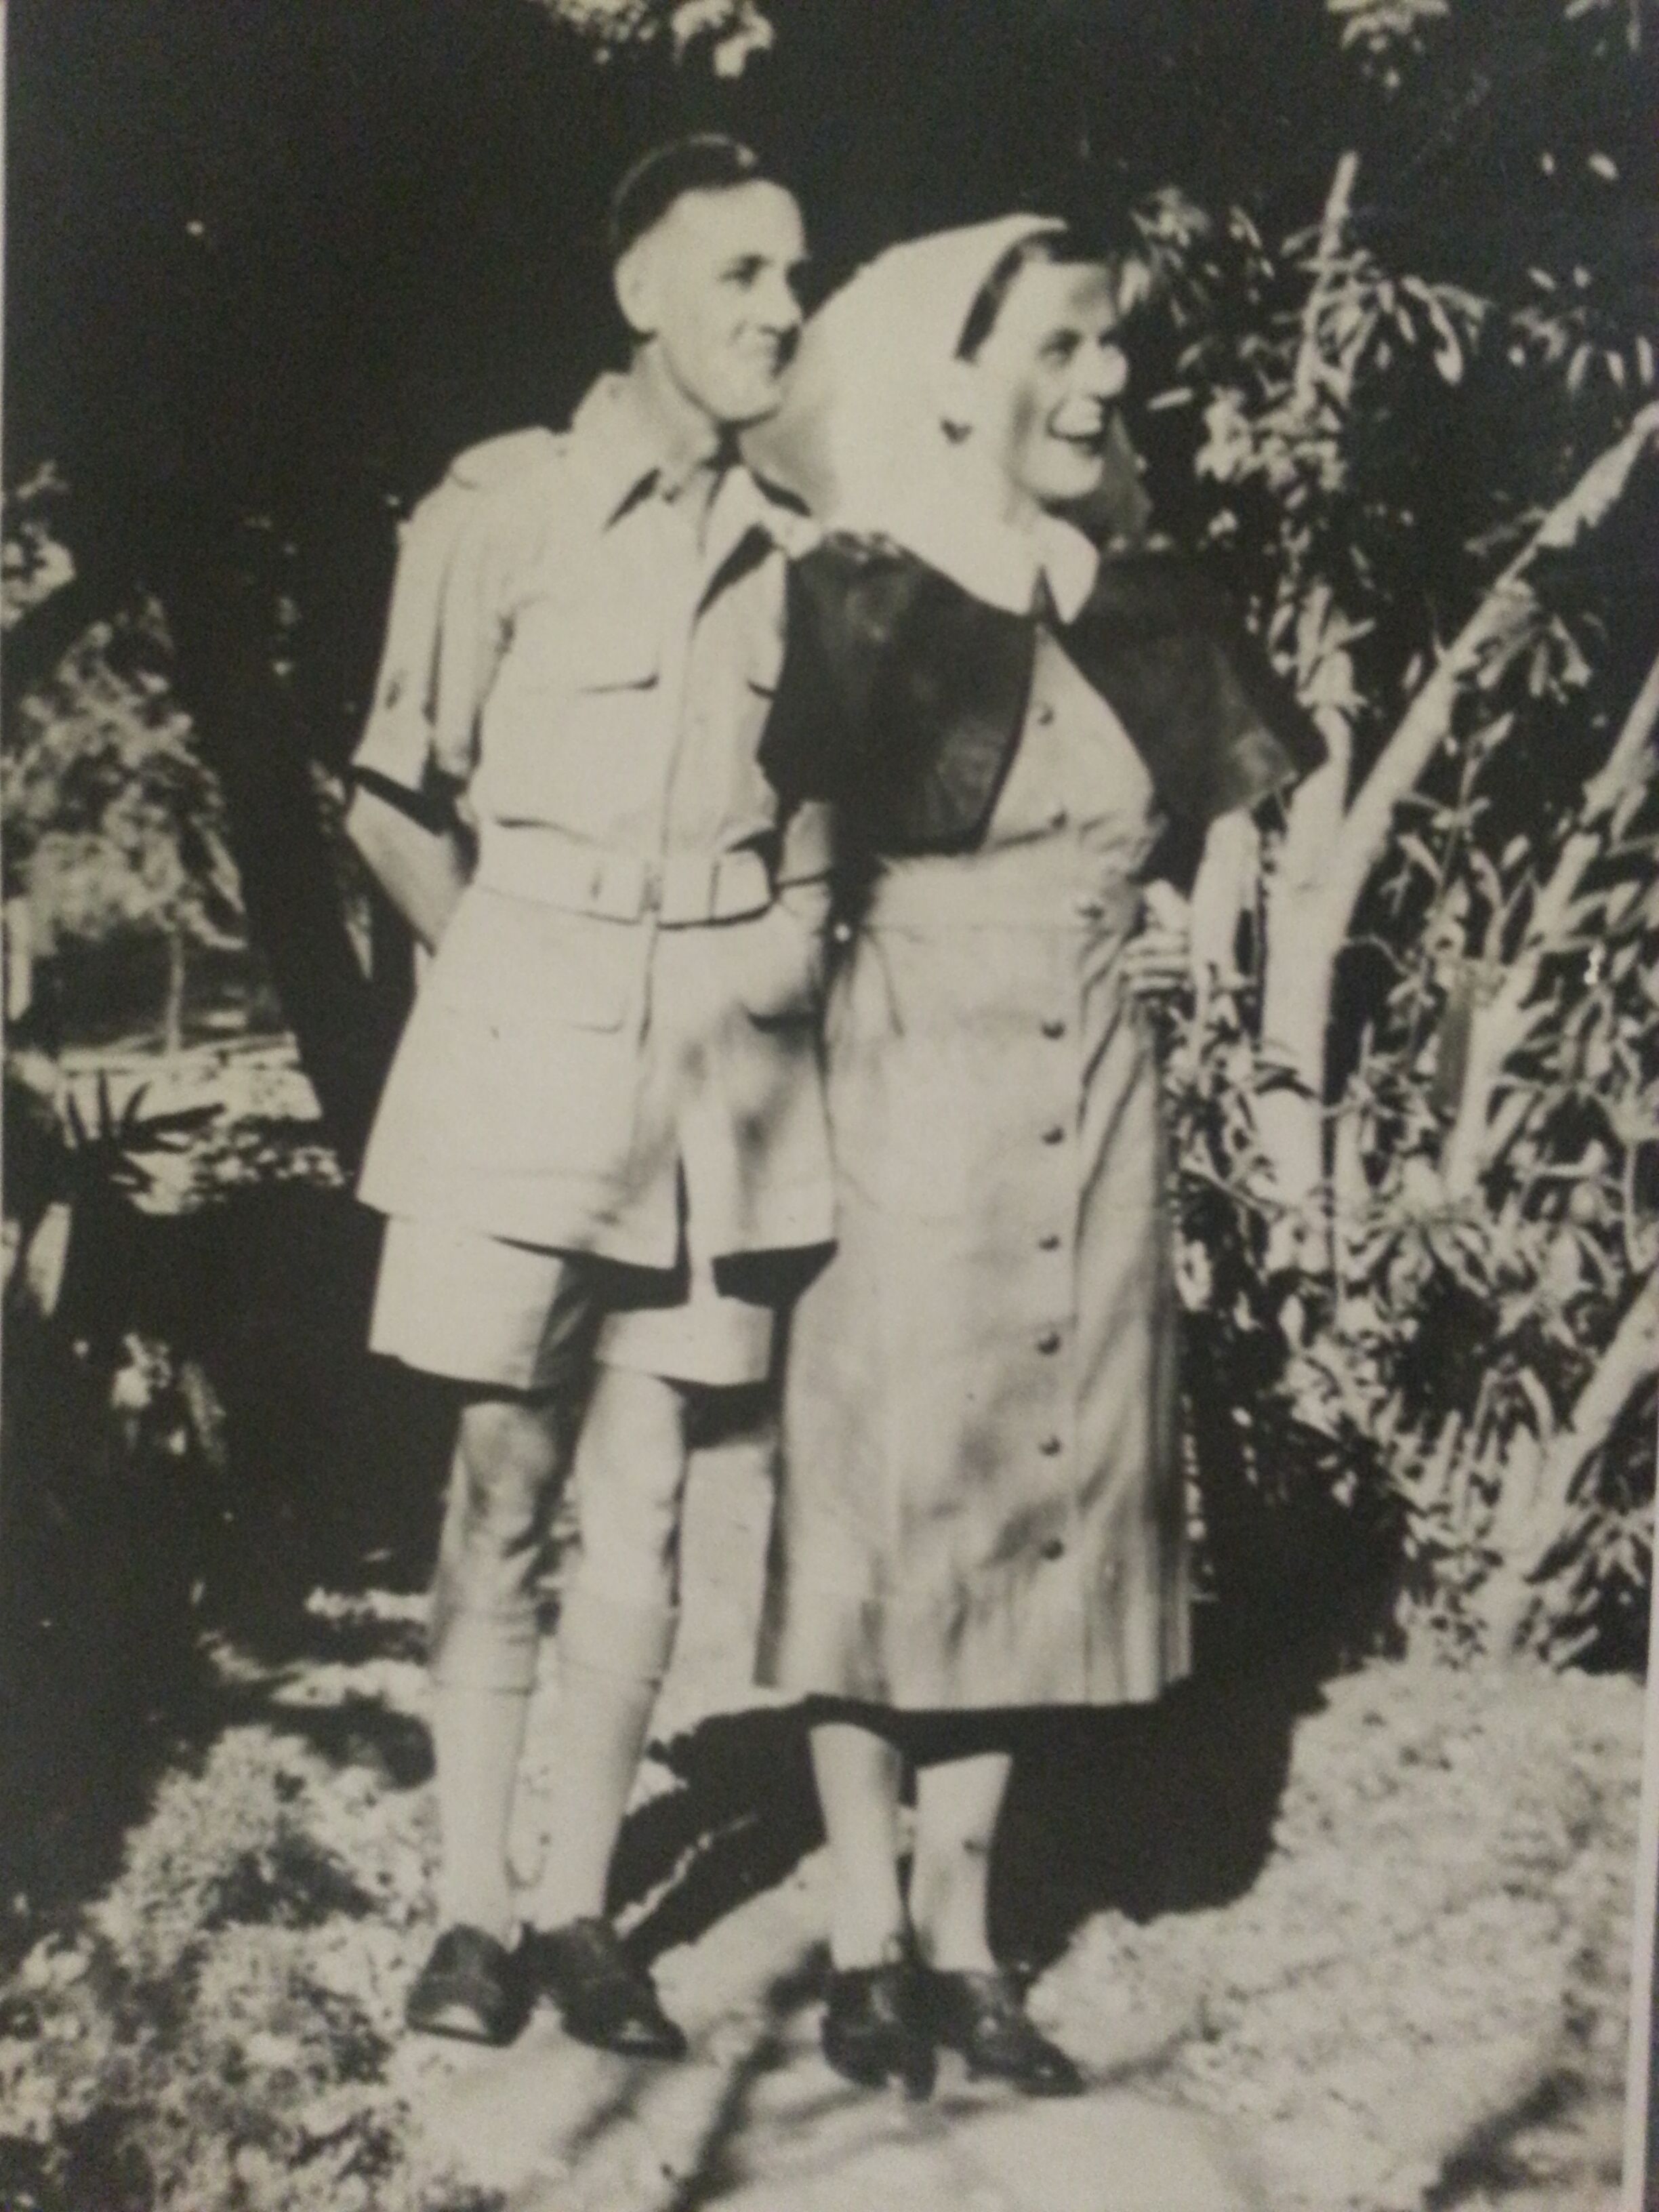 My parents in army uniform at their wedding